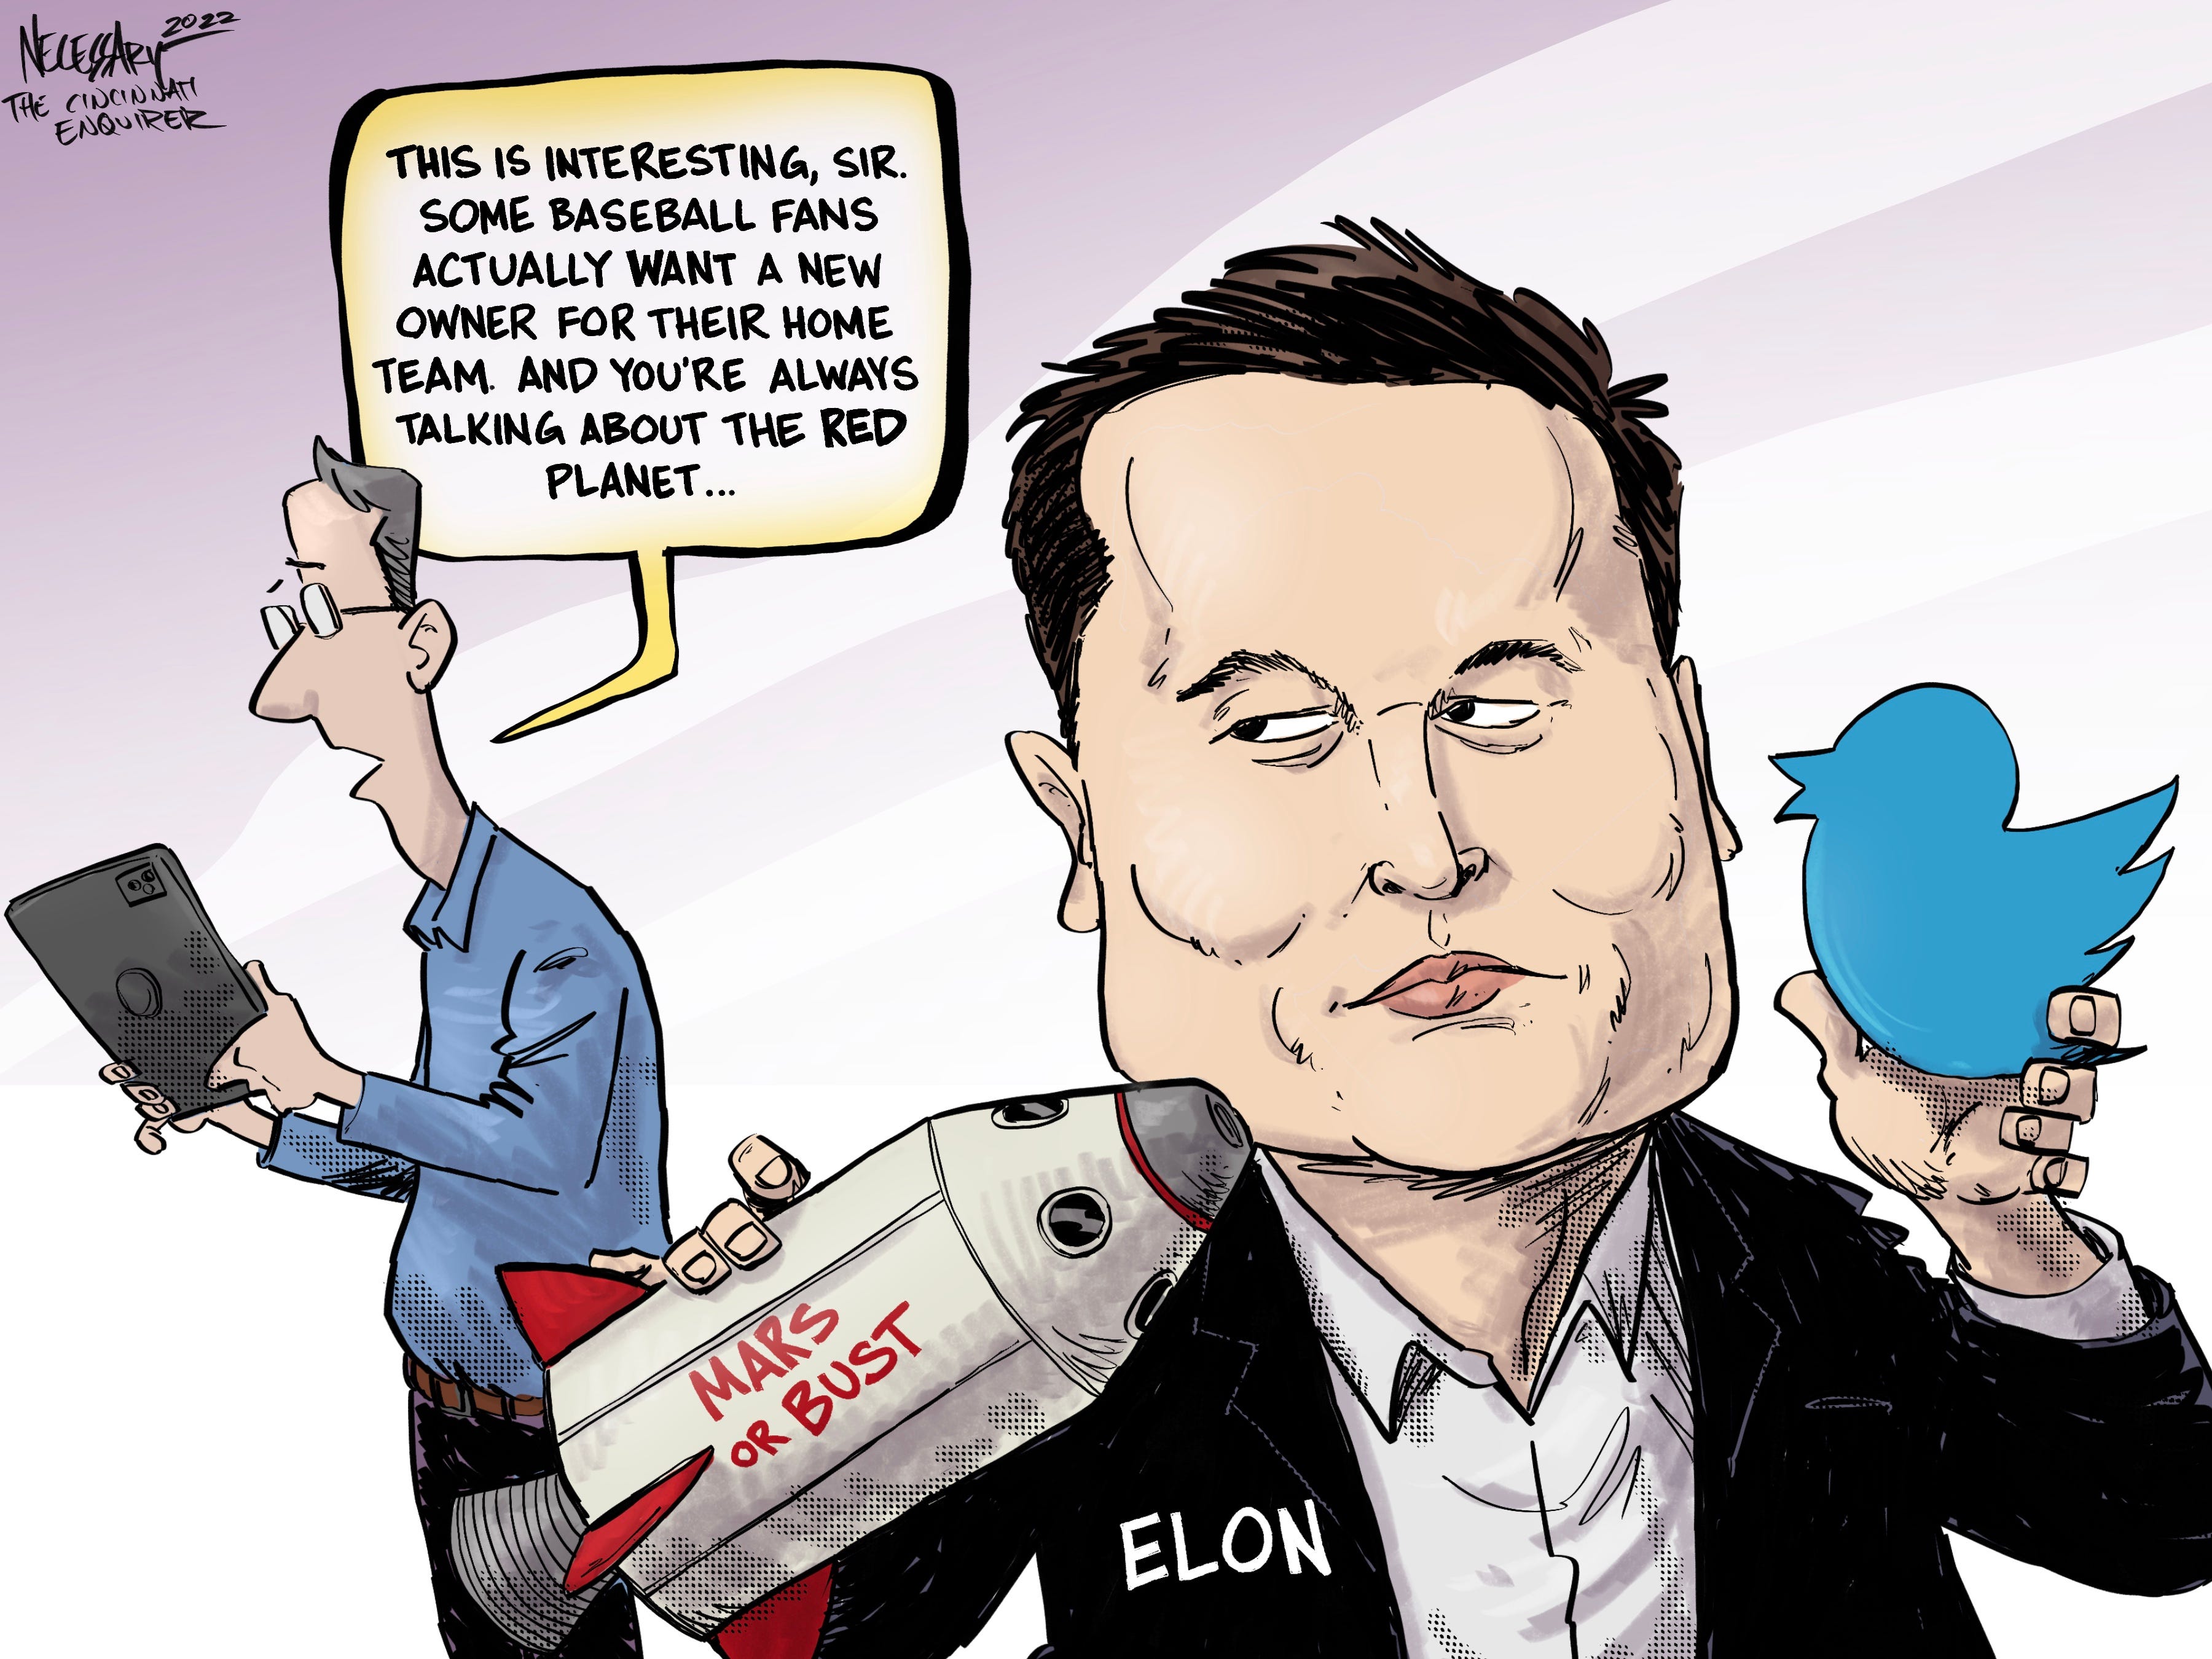 arbejder komme ud for Armstrong It's Necessary: Reds fans ask Elon Musk to rescue team